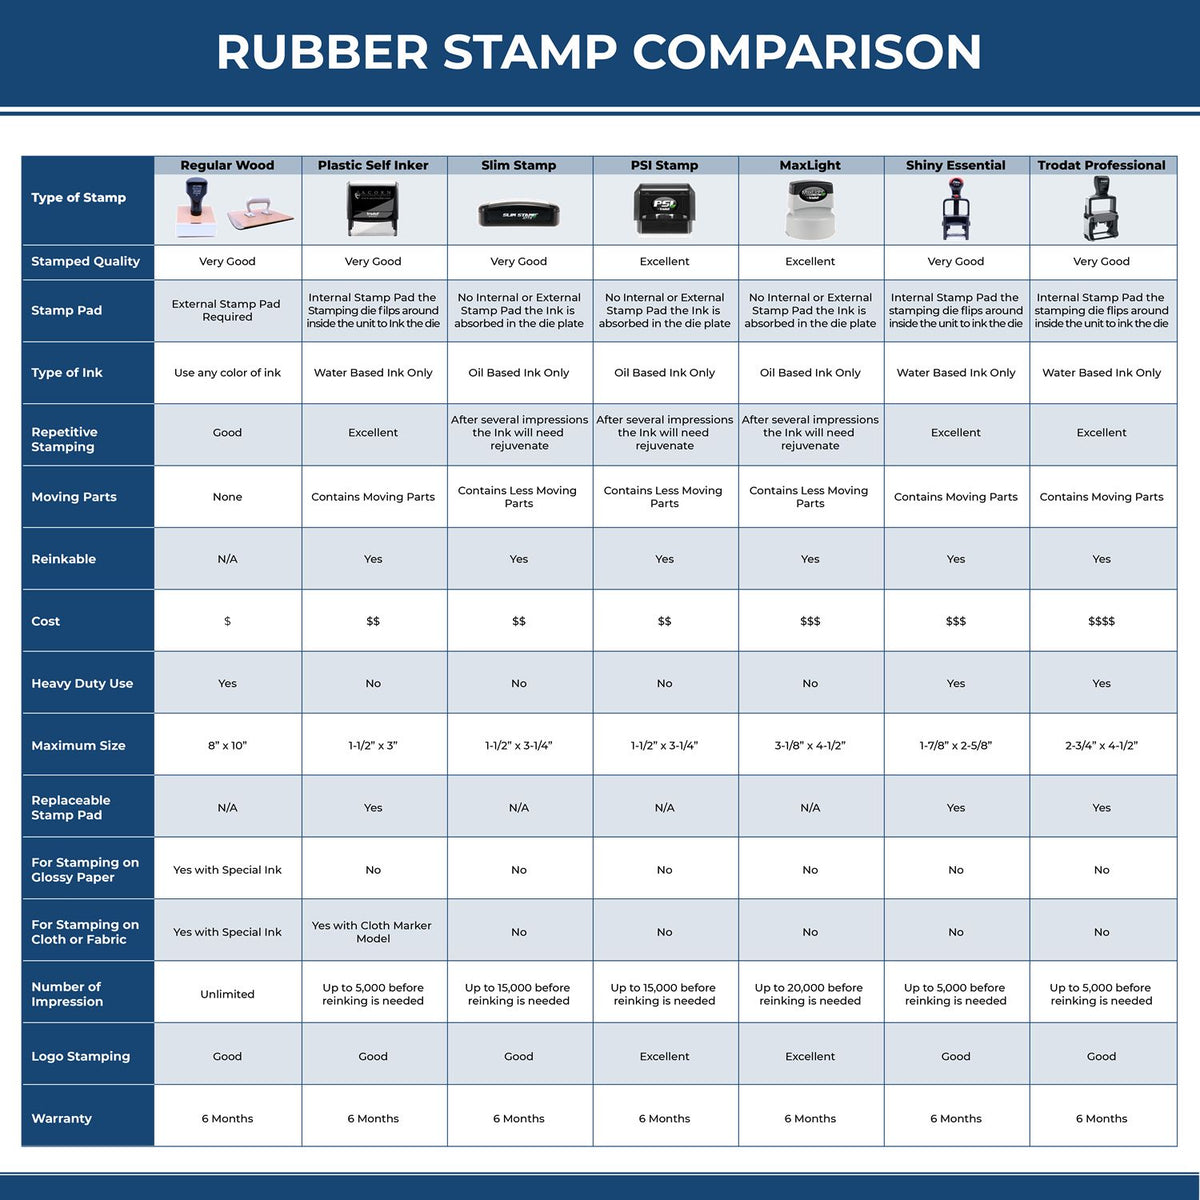 A comparison chart for the different types of mount models available for the Arizona Professional Engineer Seal Stamp.